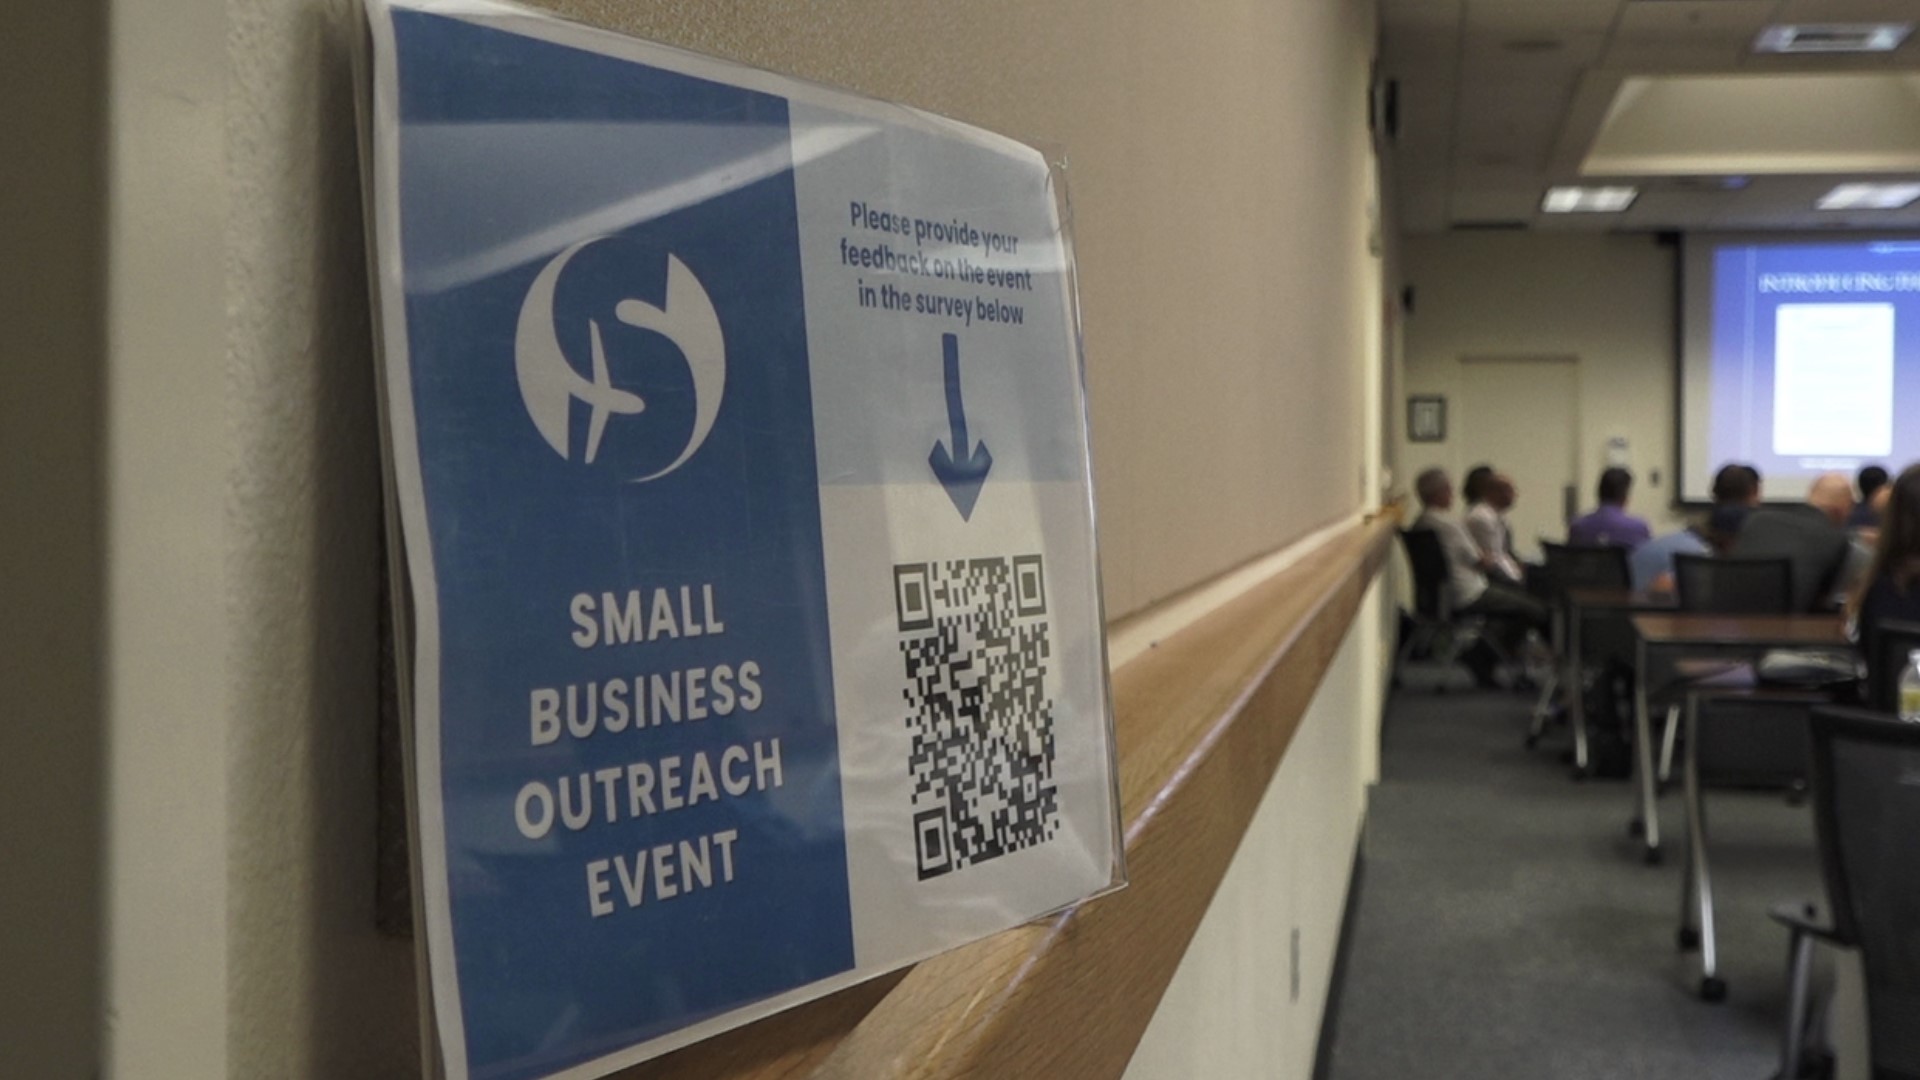 Sacramento International Airport hosted its first small business outreach event today, August 24 to inform local restaurants and businesses about opportunities.